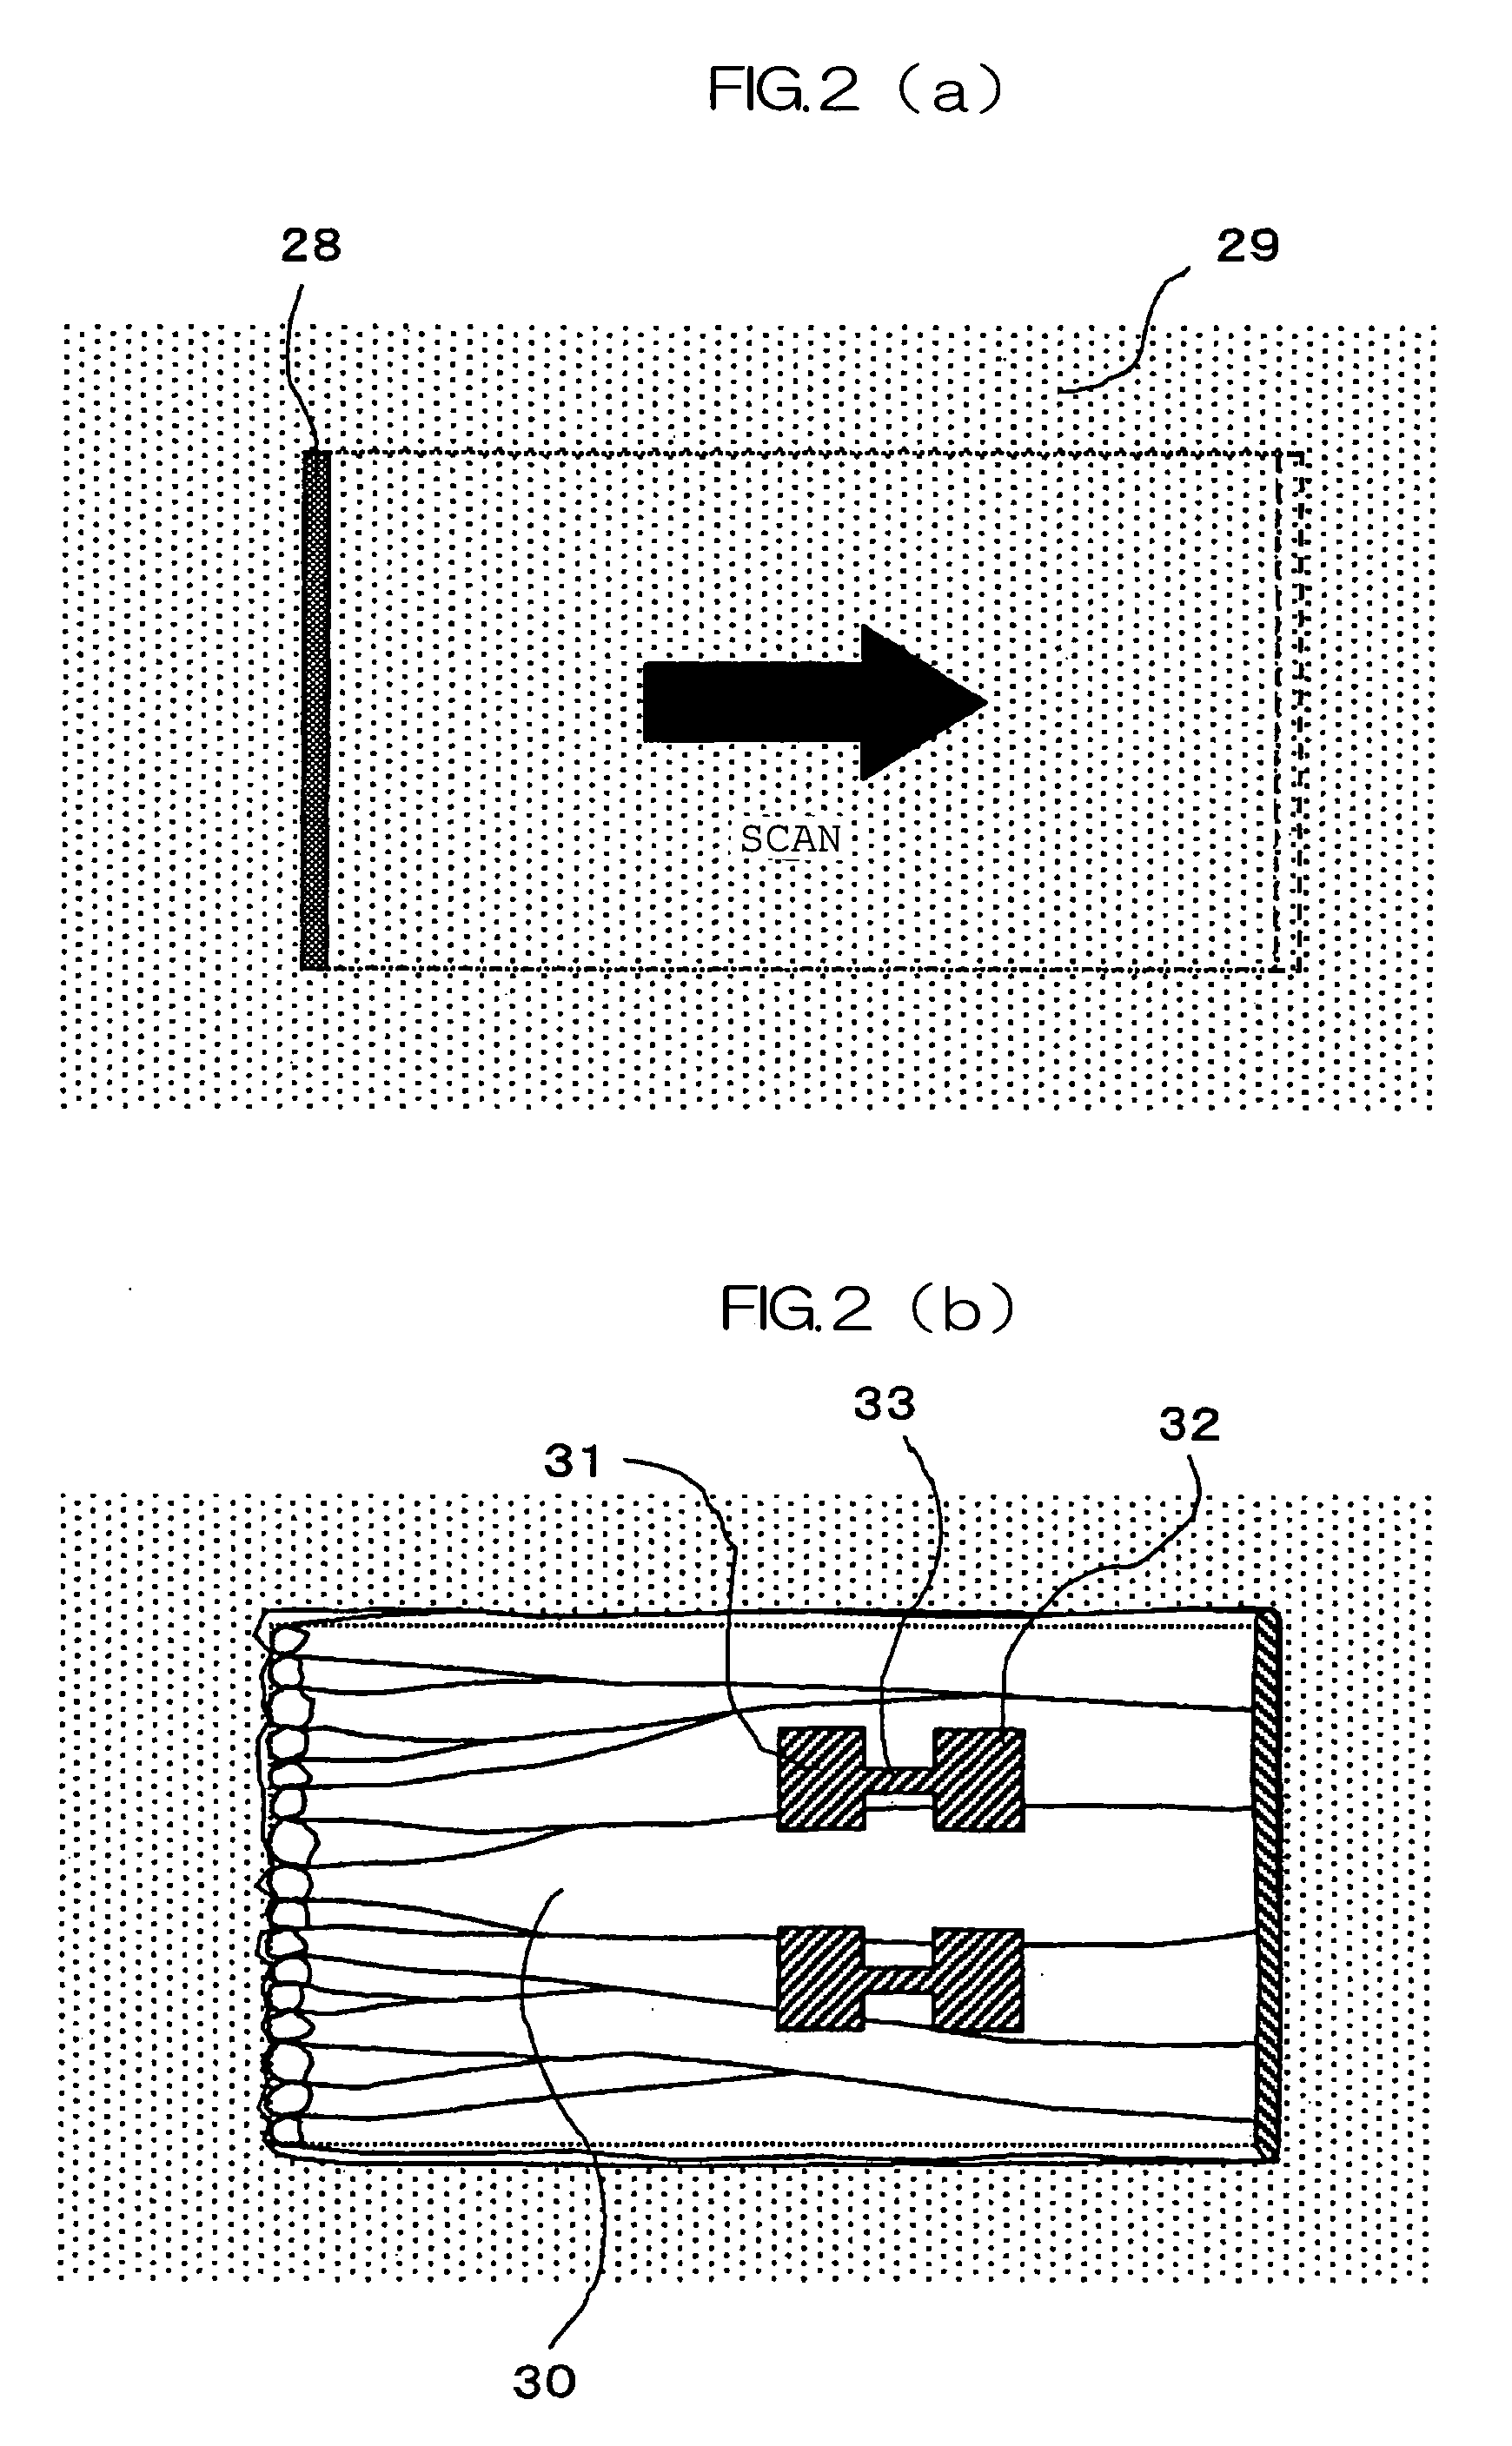 Apparatus for manufacturing flat panel display devices